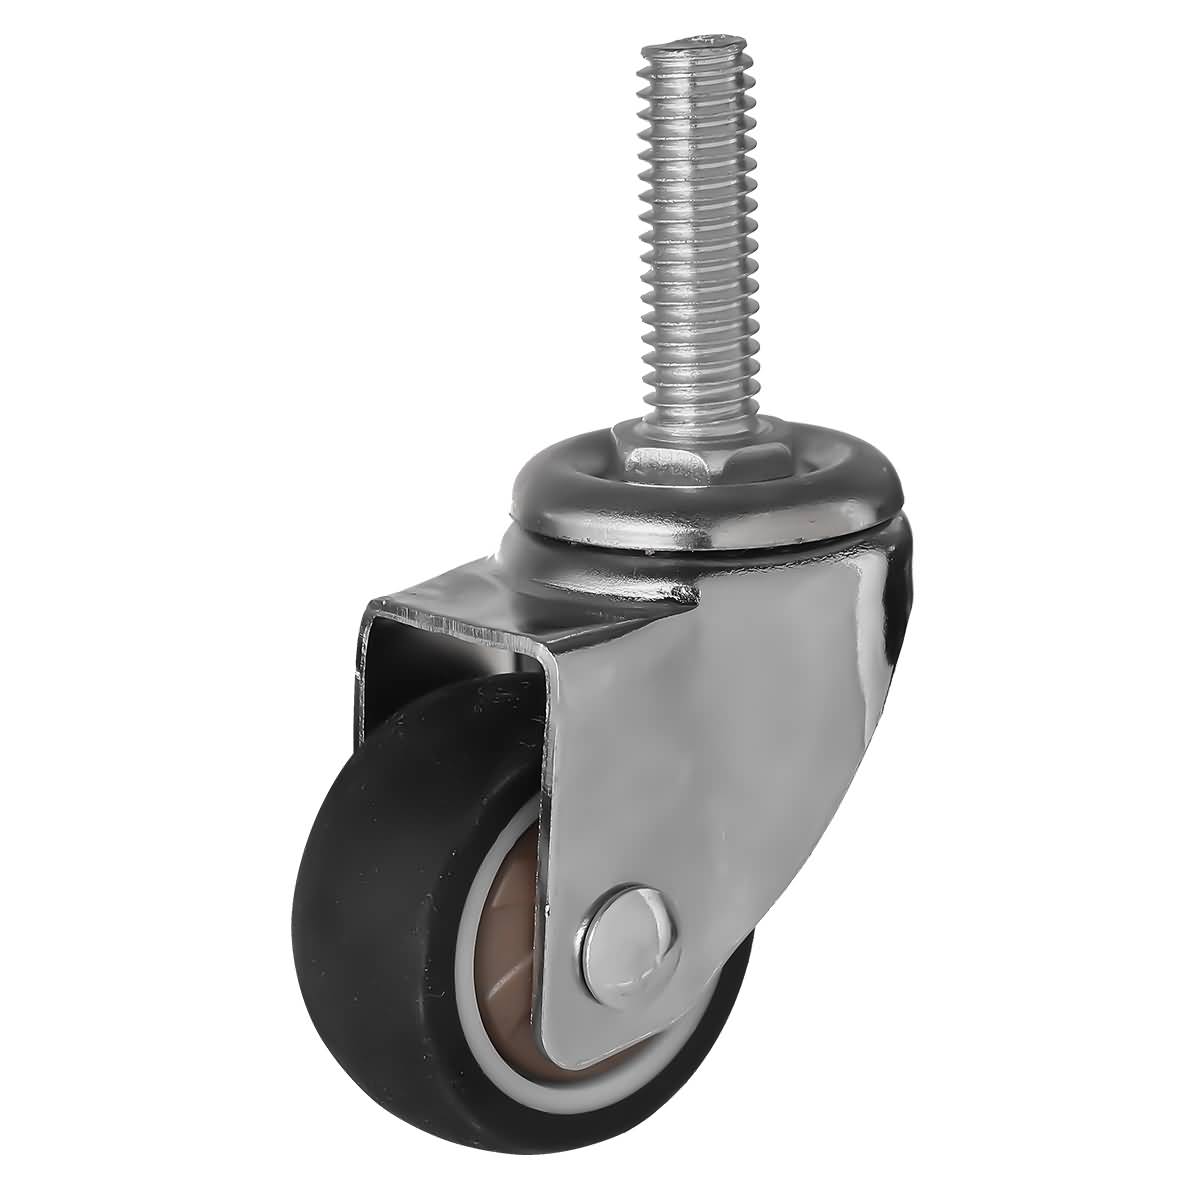 LKP Swivel Caster Wheels 1.5 Inch Heavy Duty Rubber Casters with Brake Industrial Swivel Stem Casters for Furniture 80KG Load Capacity/Piece 4pcs